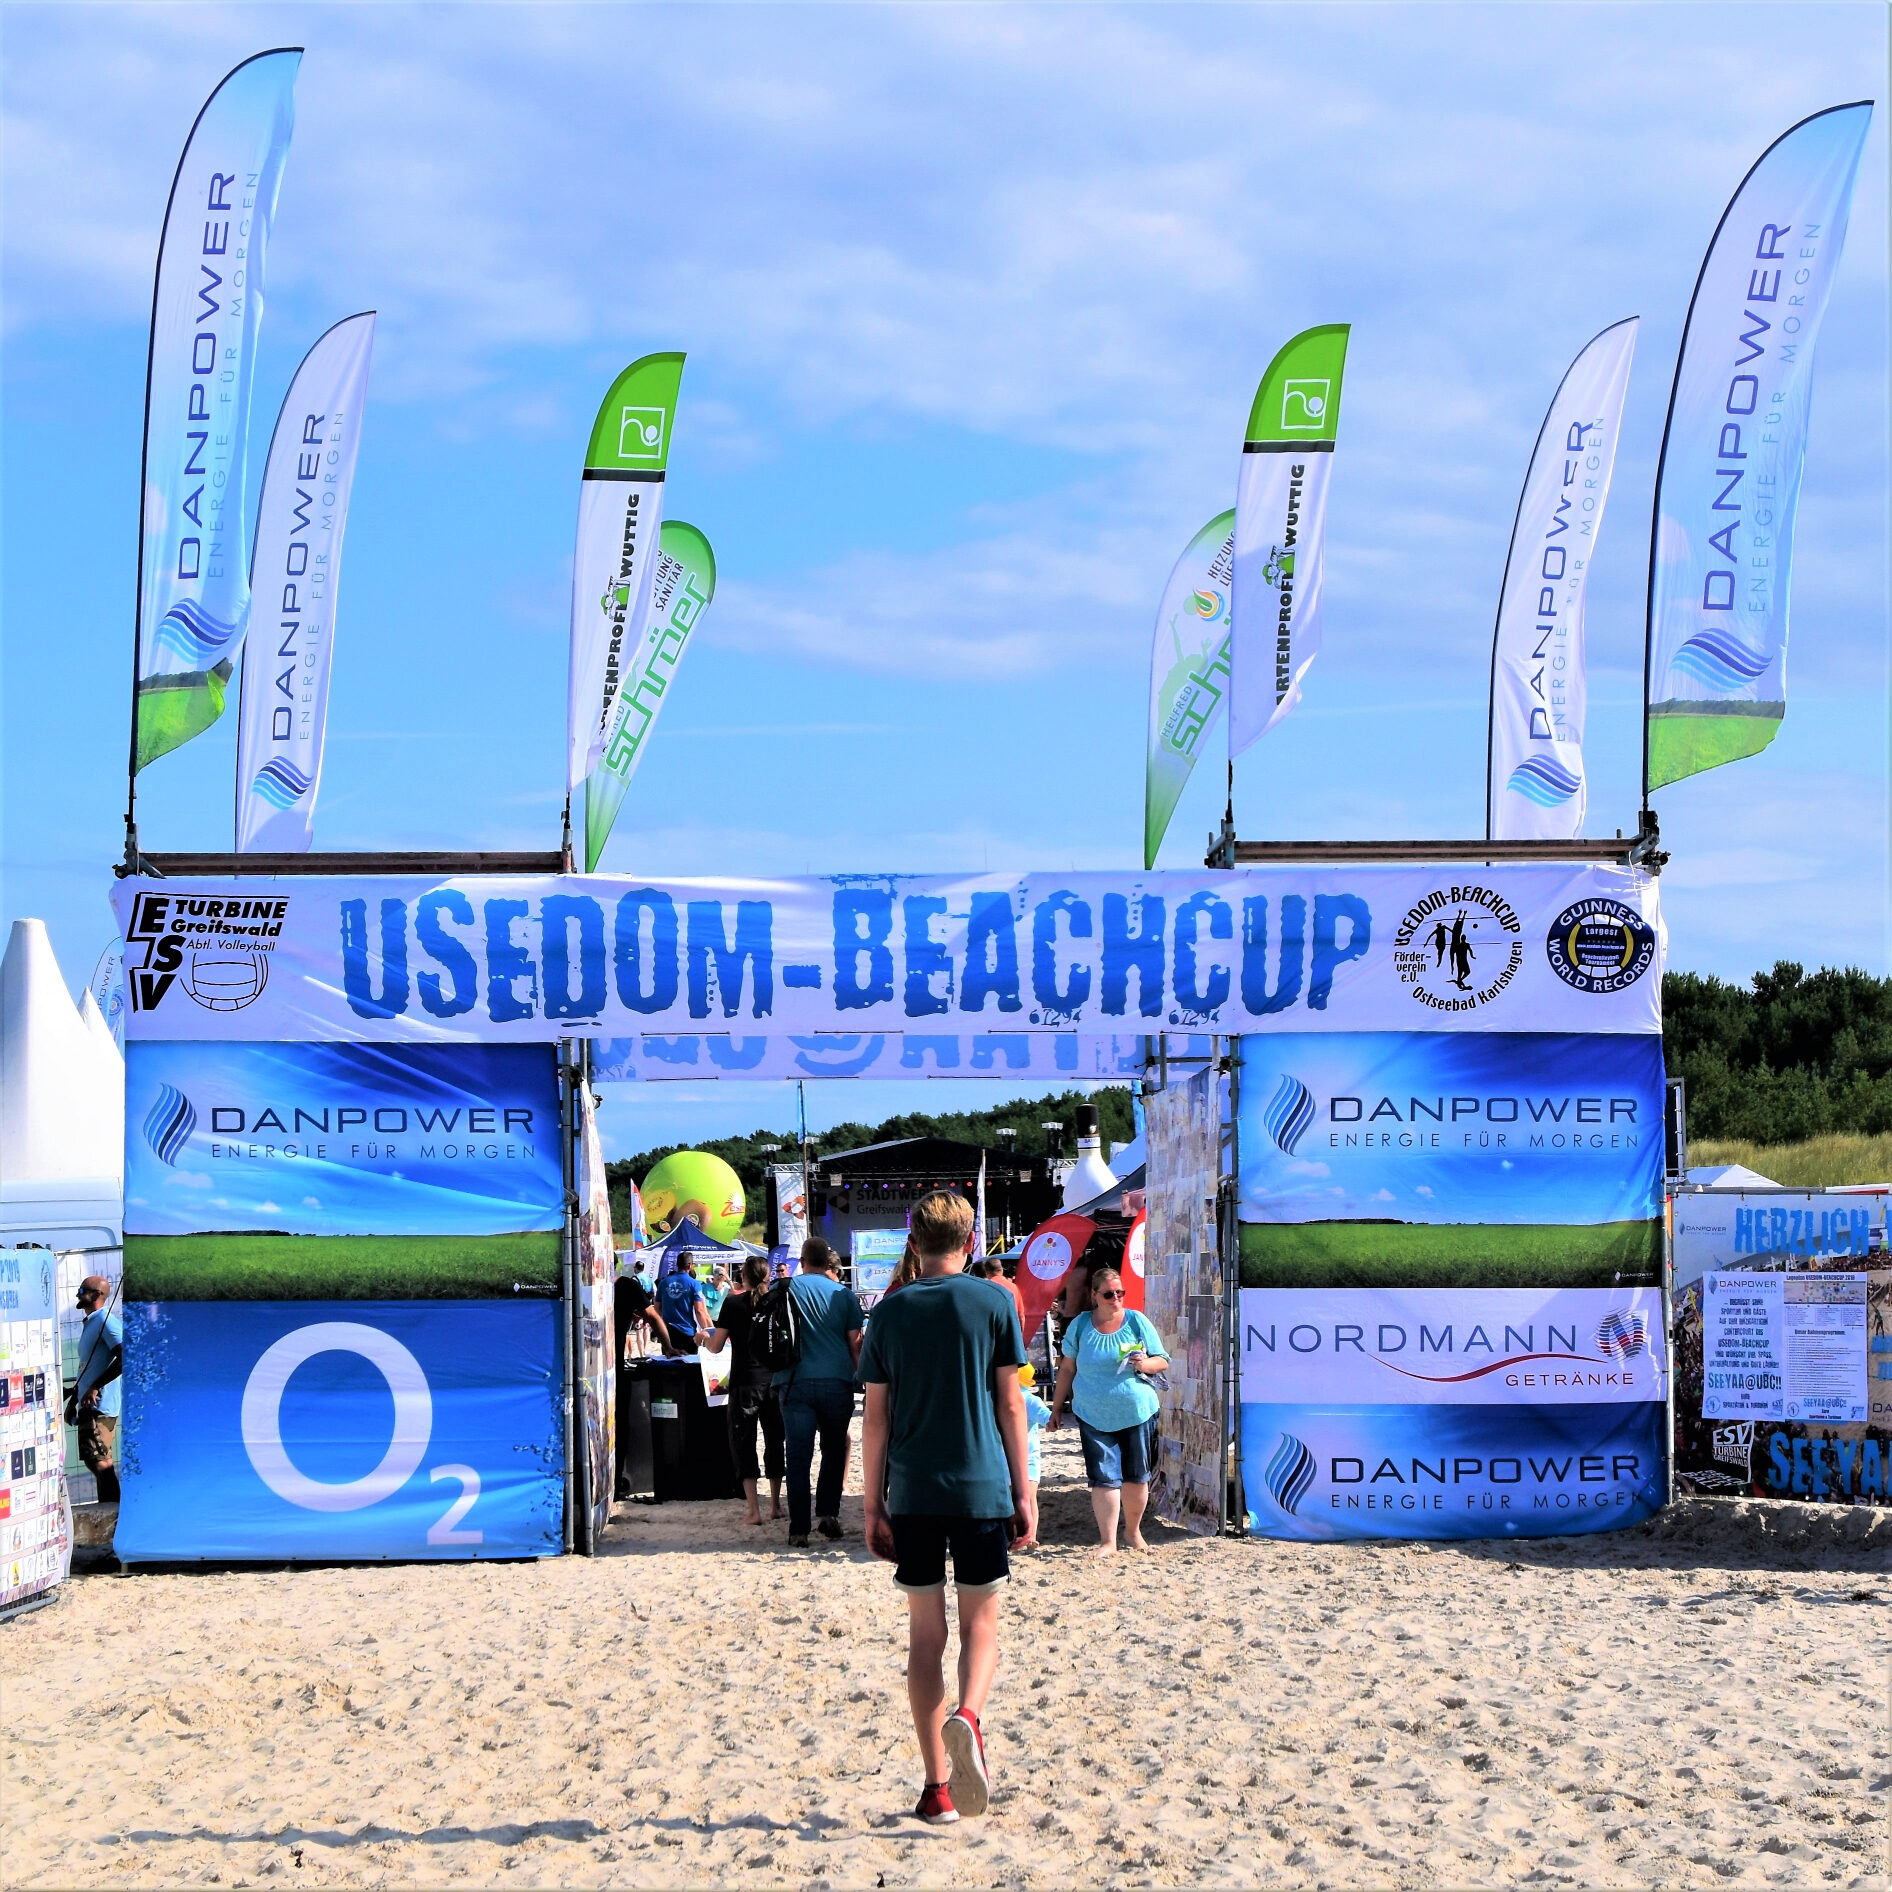 advertising-flags-on-beach